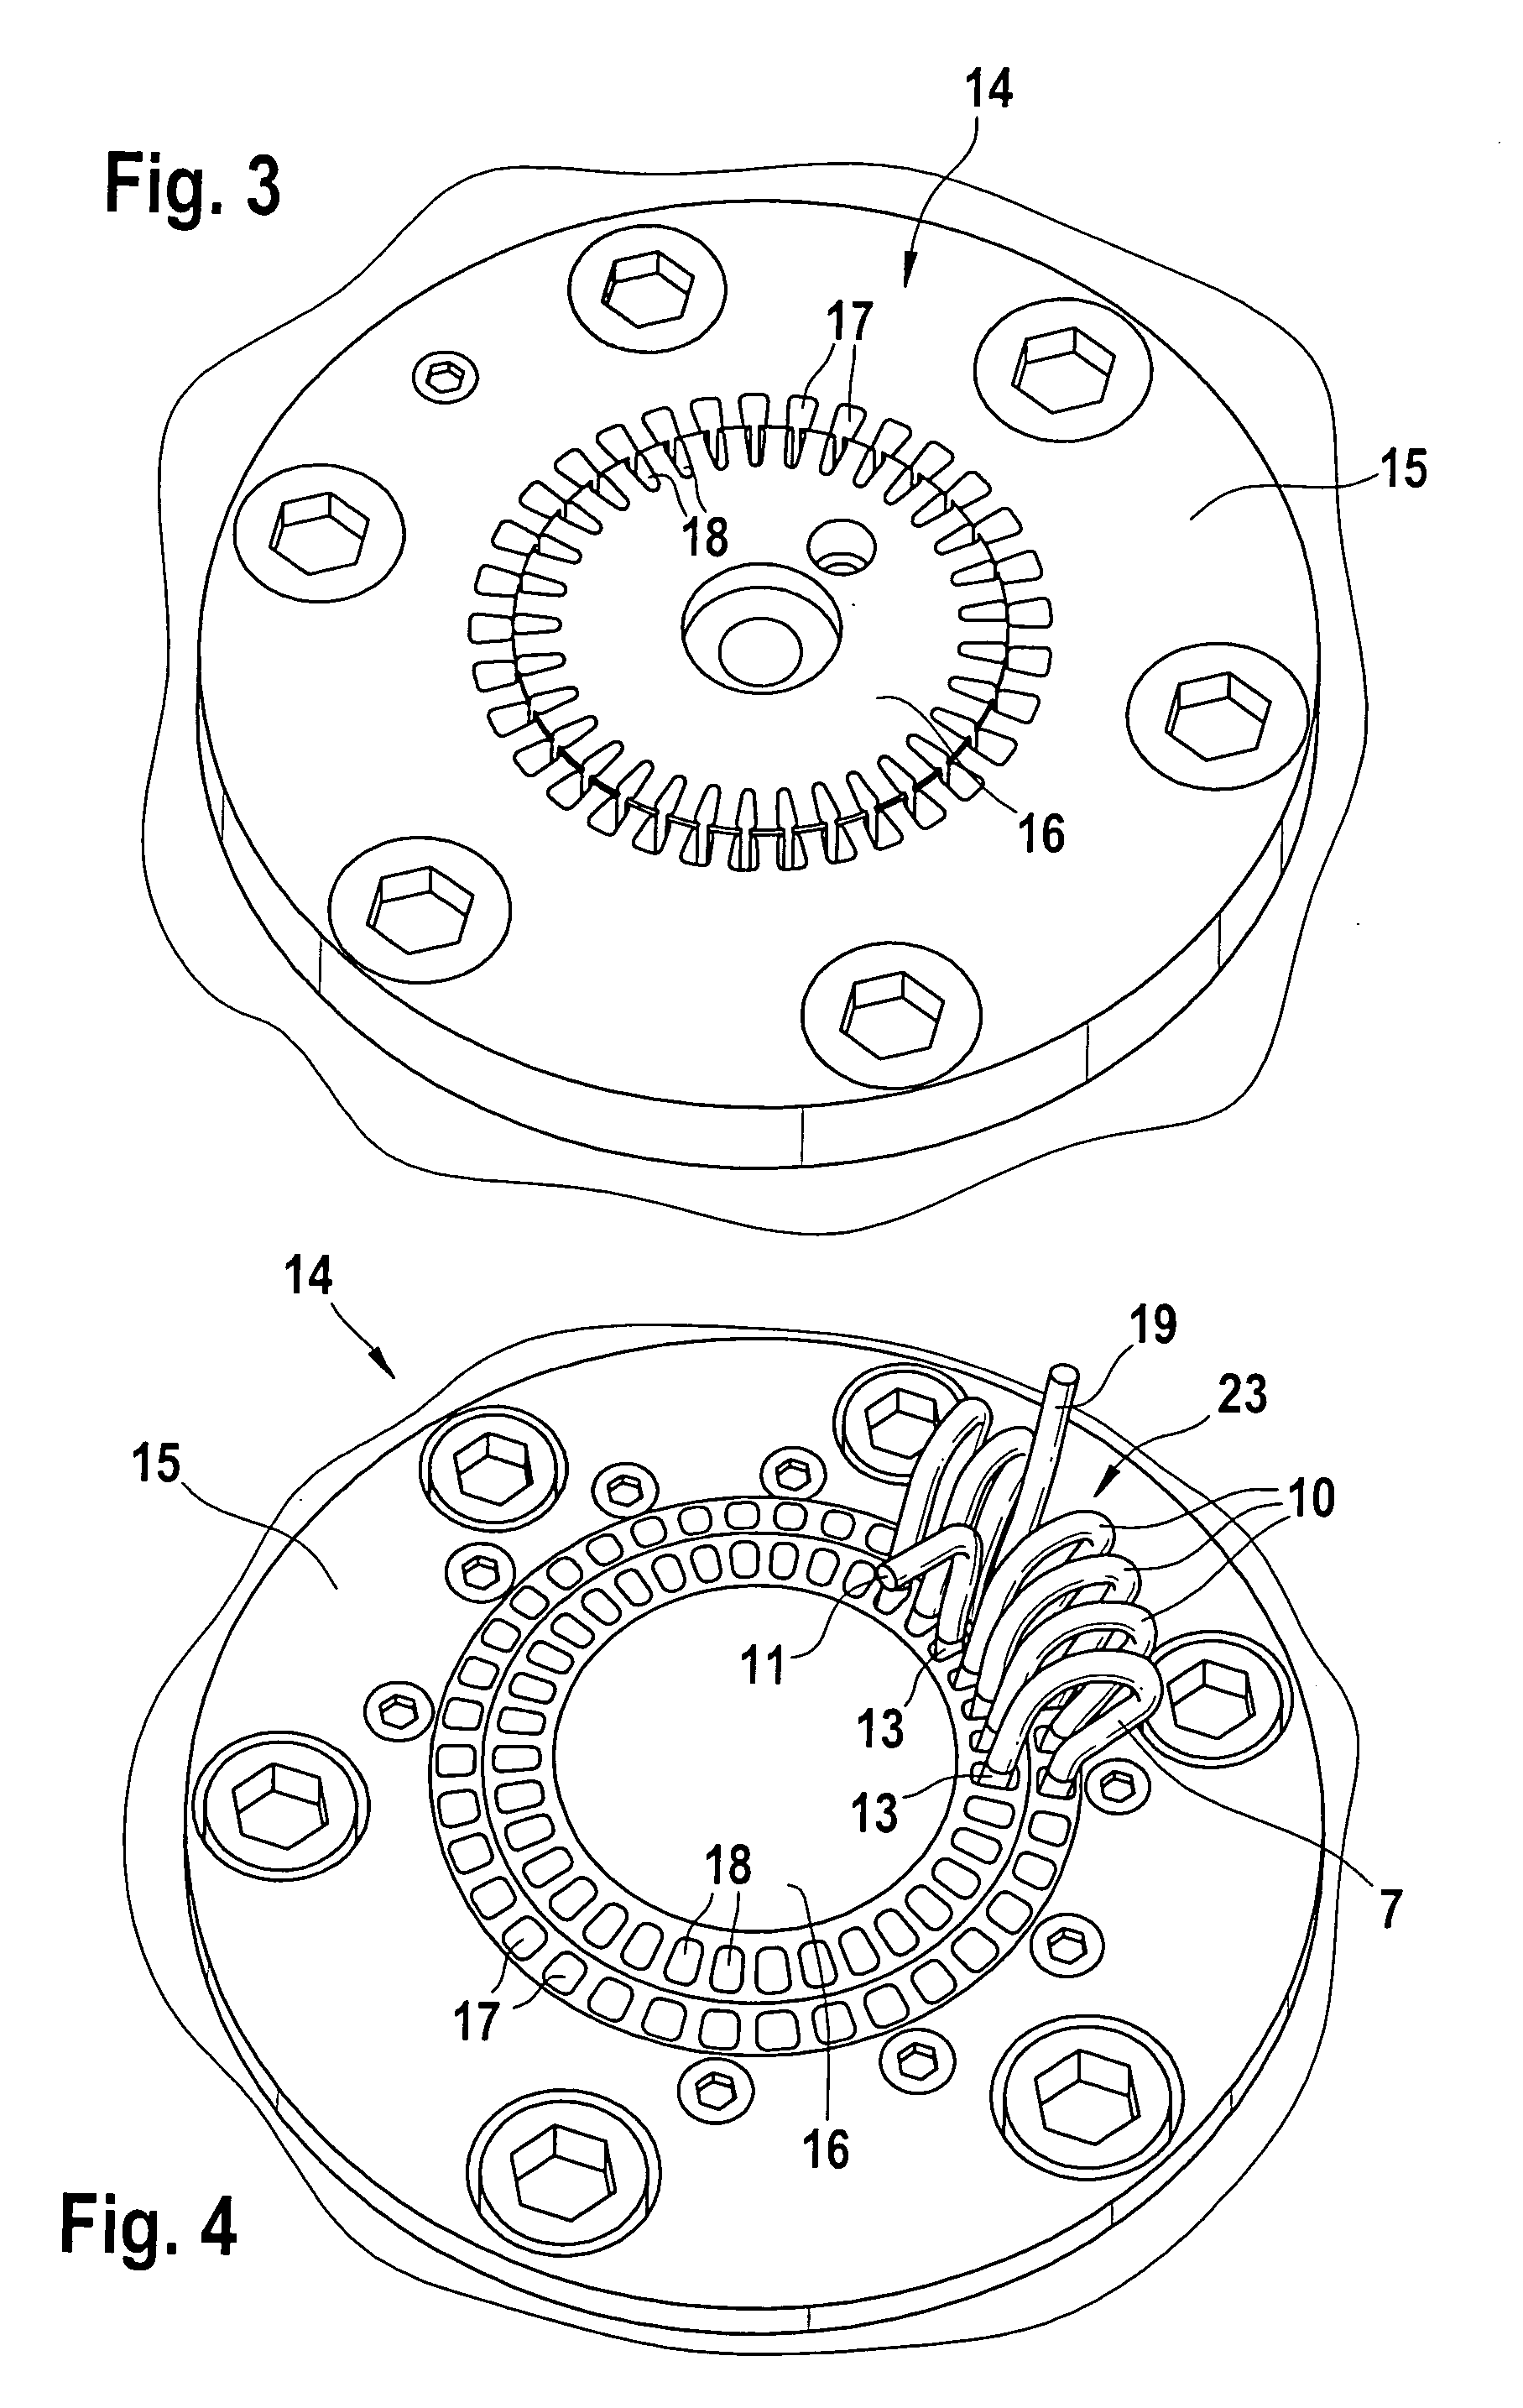 Method for producing coils and coil circuits